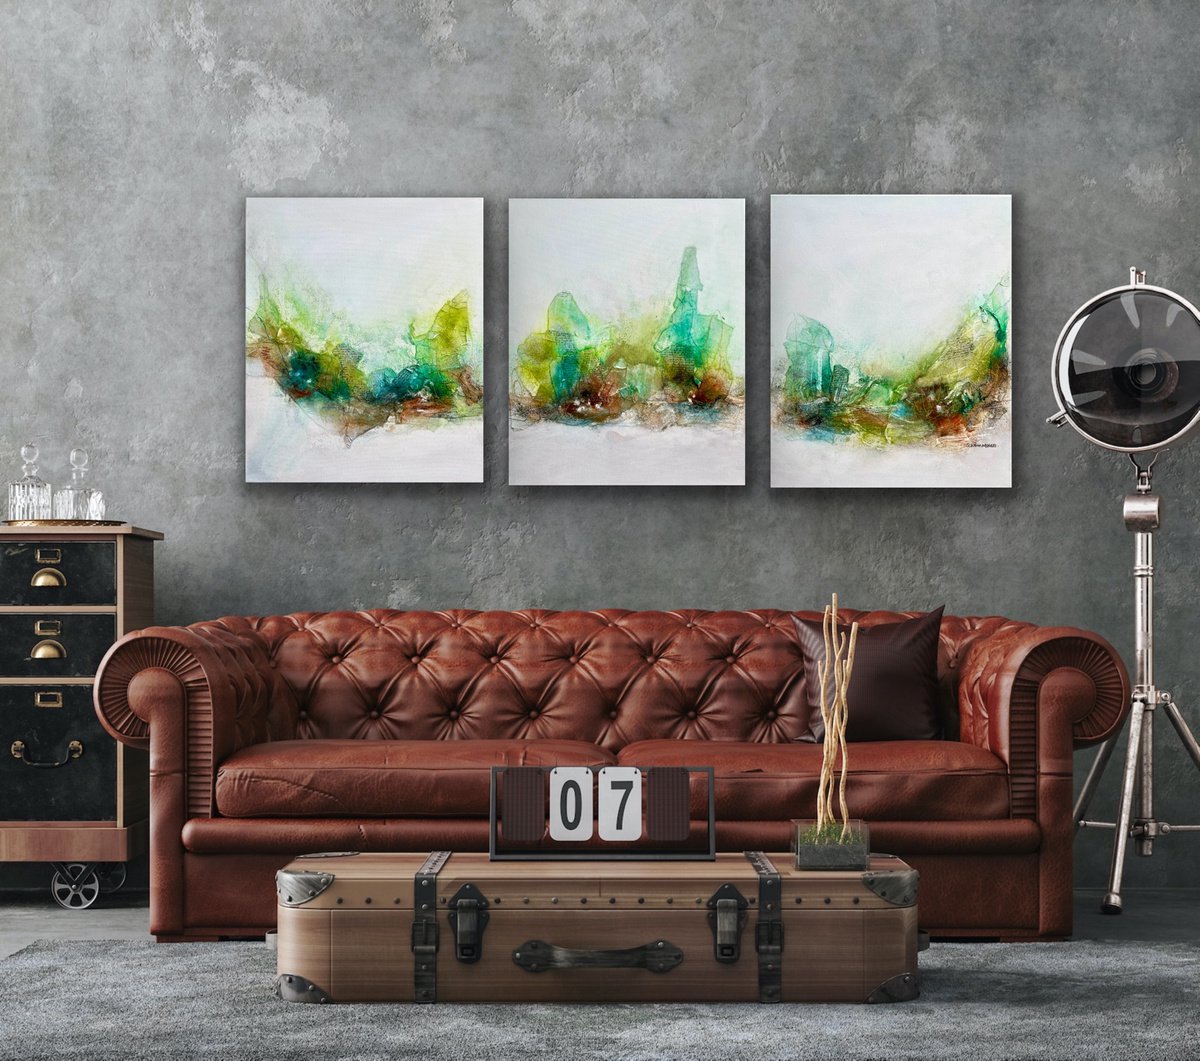 Constant Change #12 I triptych I 150x60 cm I natural abstract artwork I ready to ha... by Kirsten Schankweiler